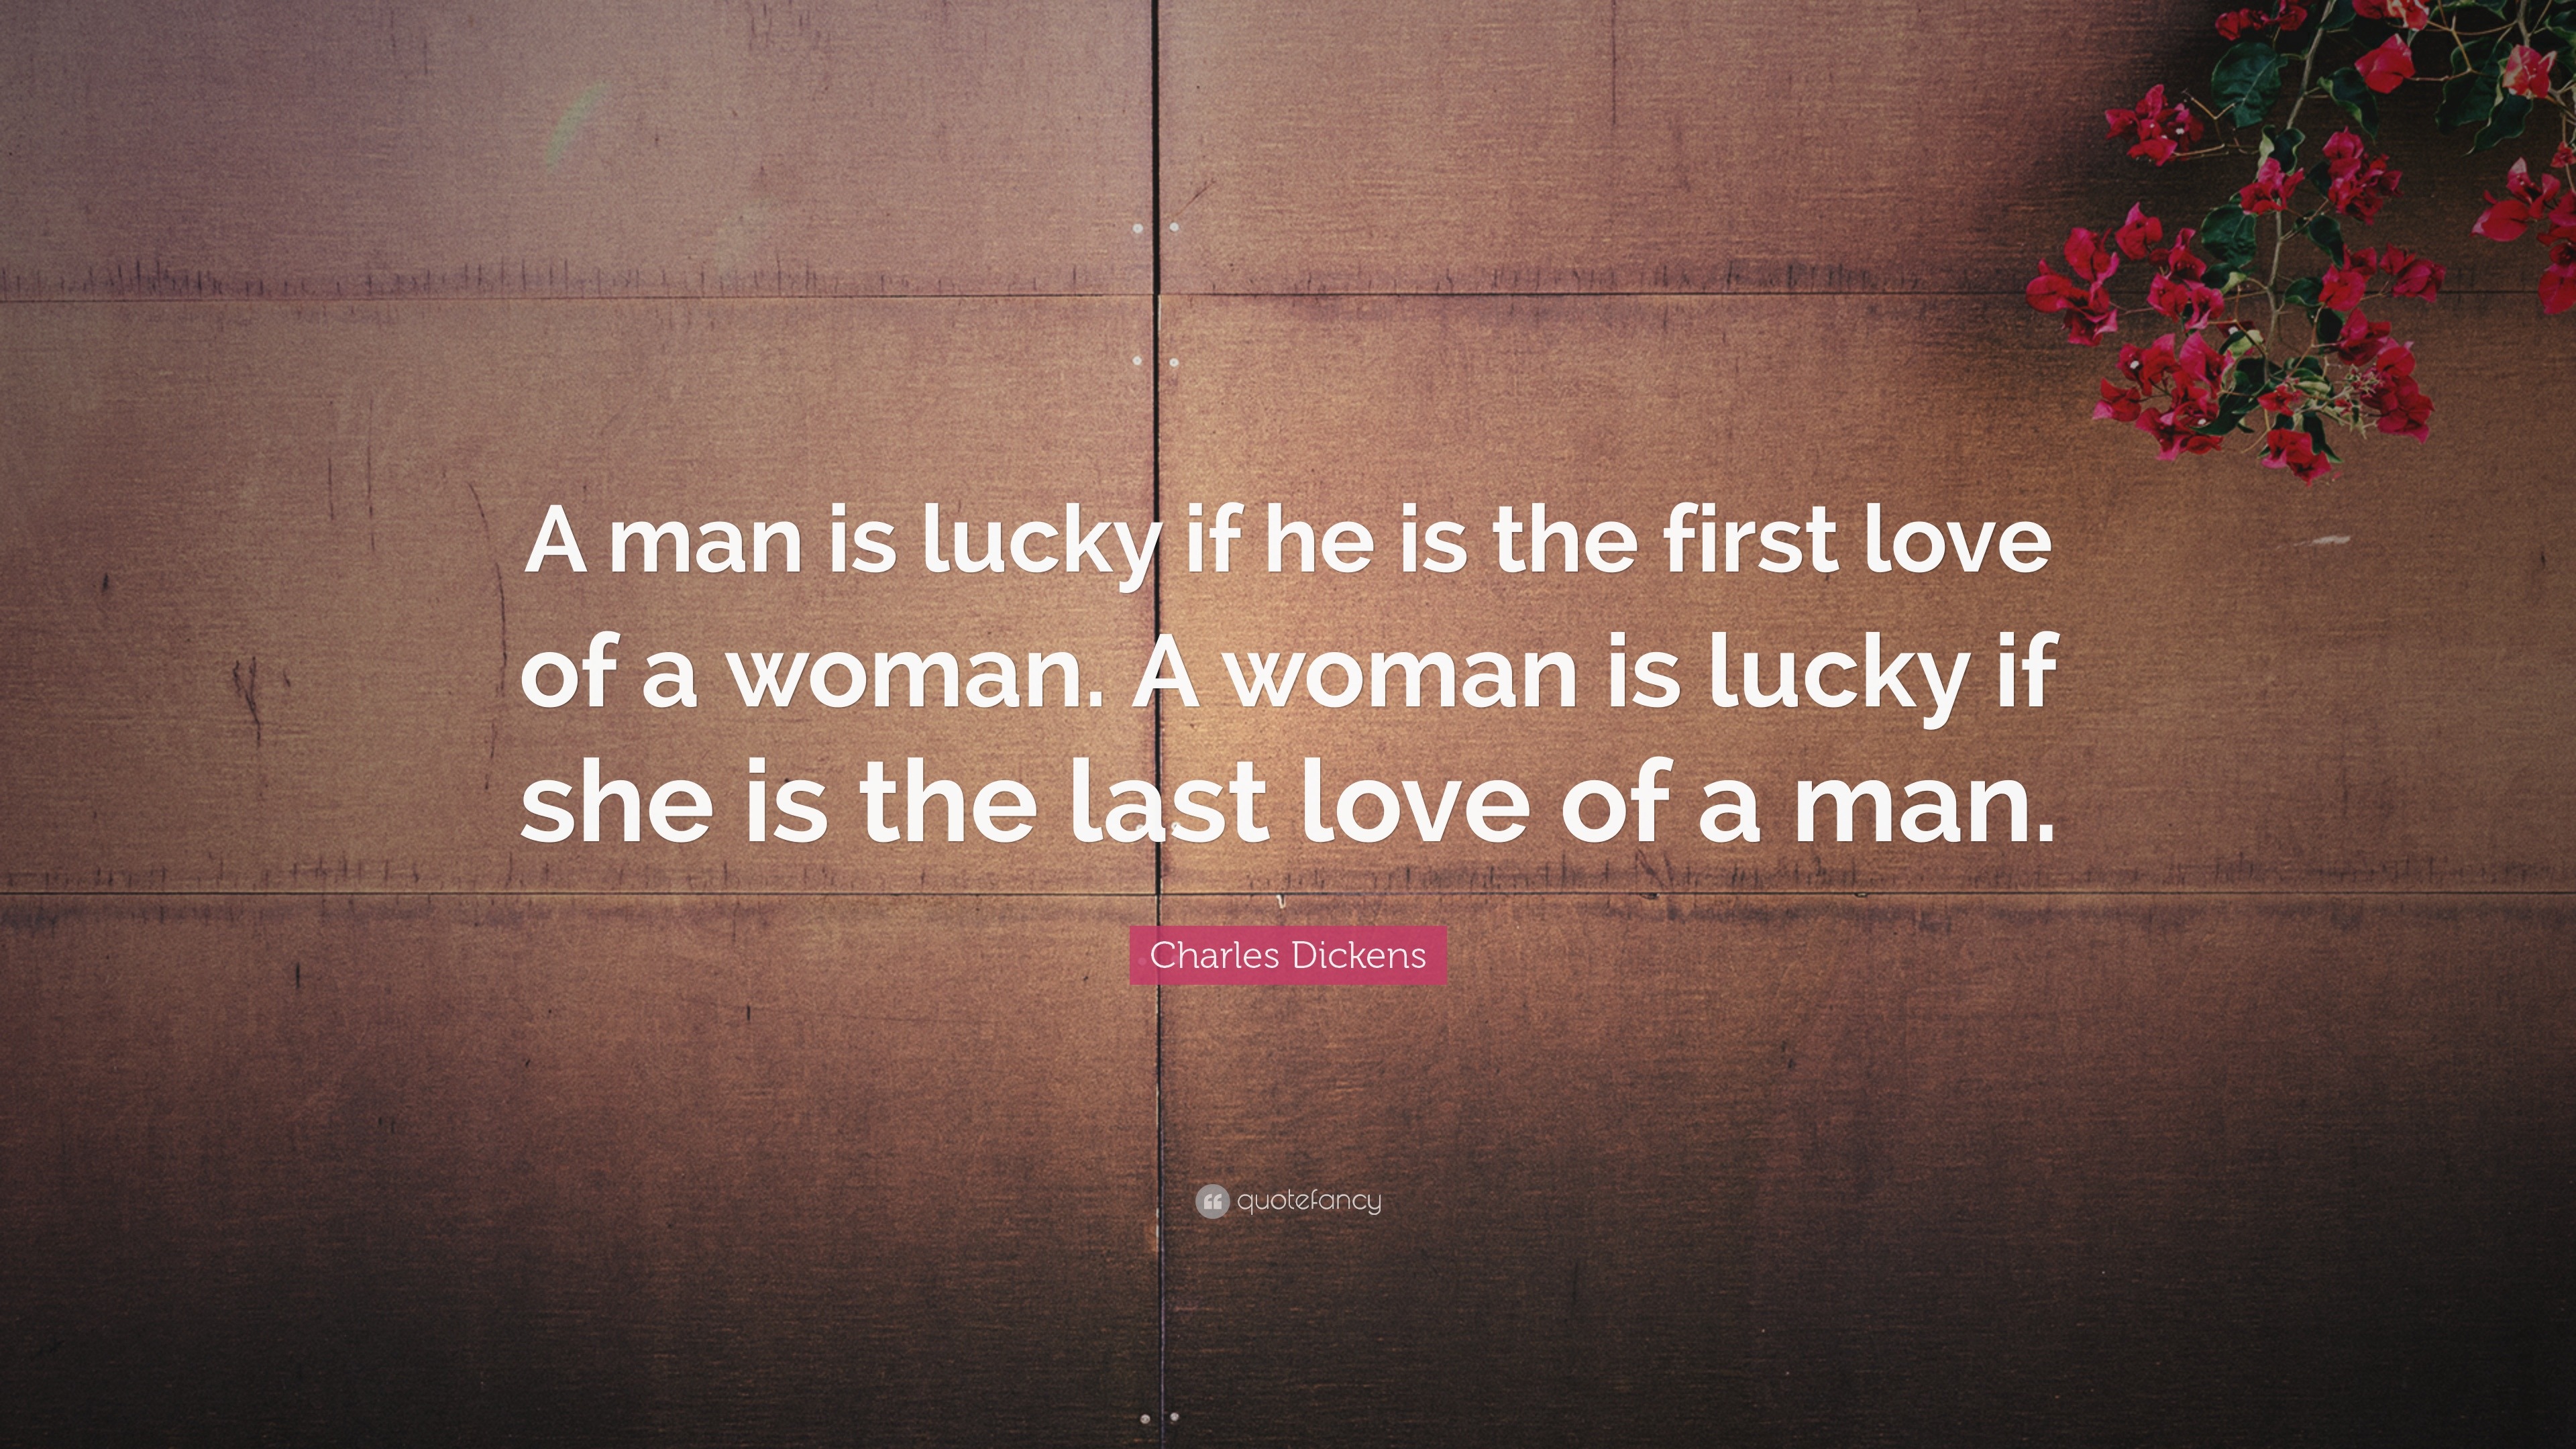 Charles Dickens Quote “A man is lucky if he is the first love of